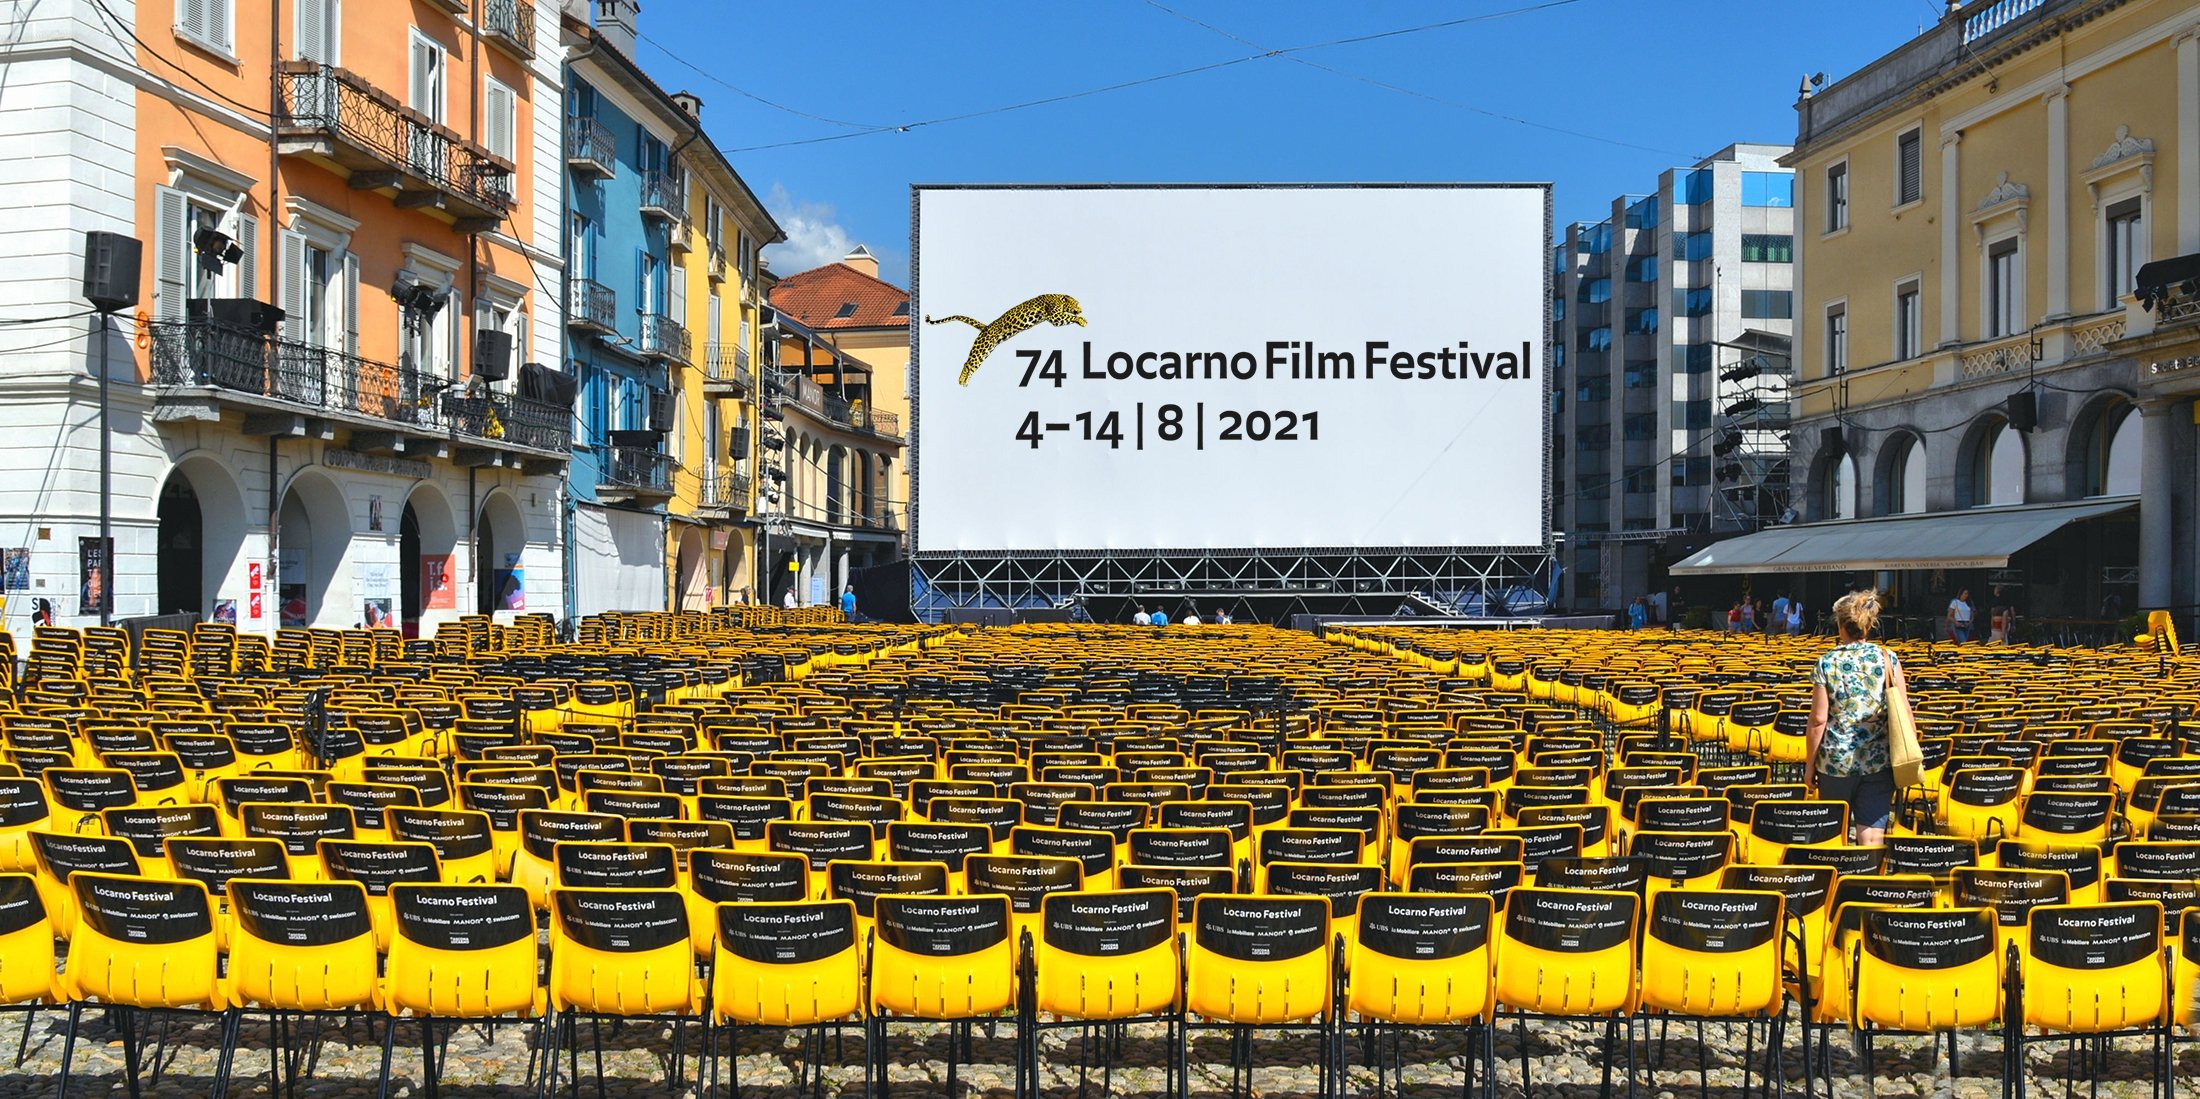 10 Best Films From The 74th Locarno Film Festival Ranked